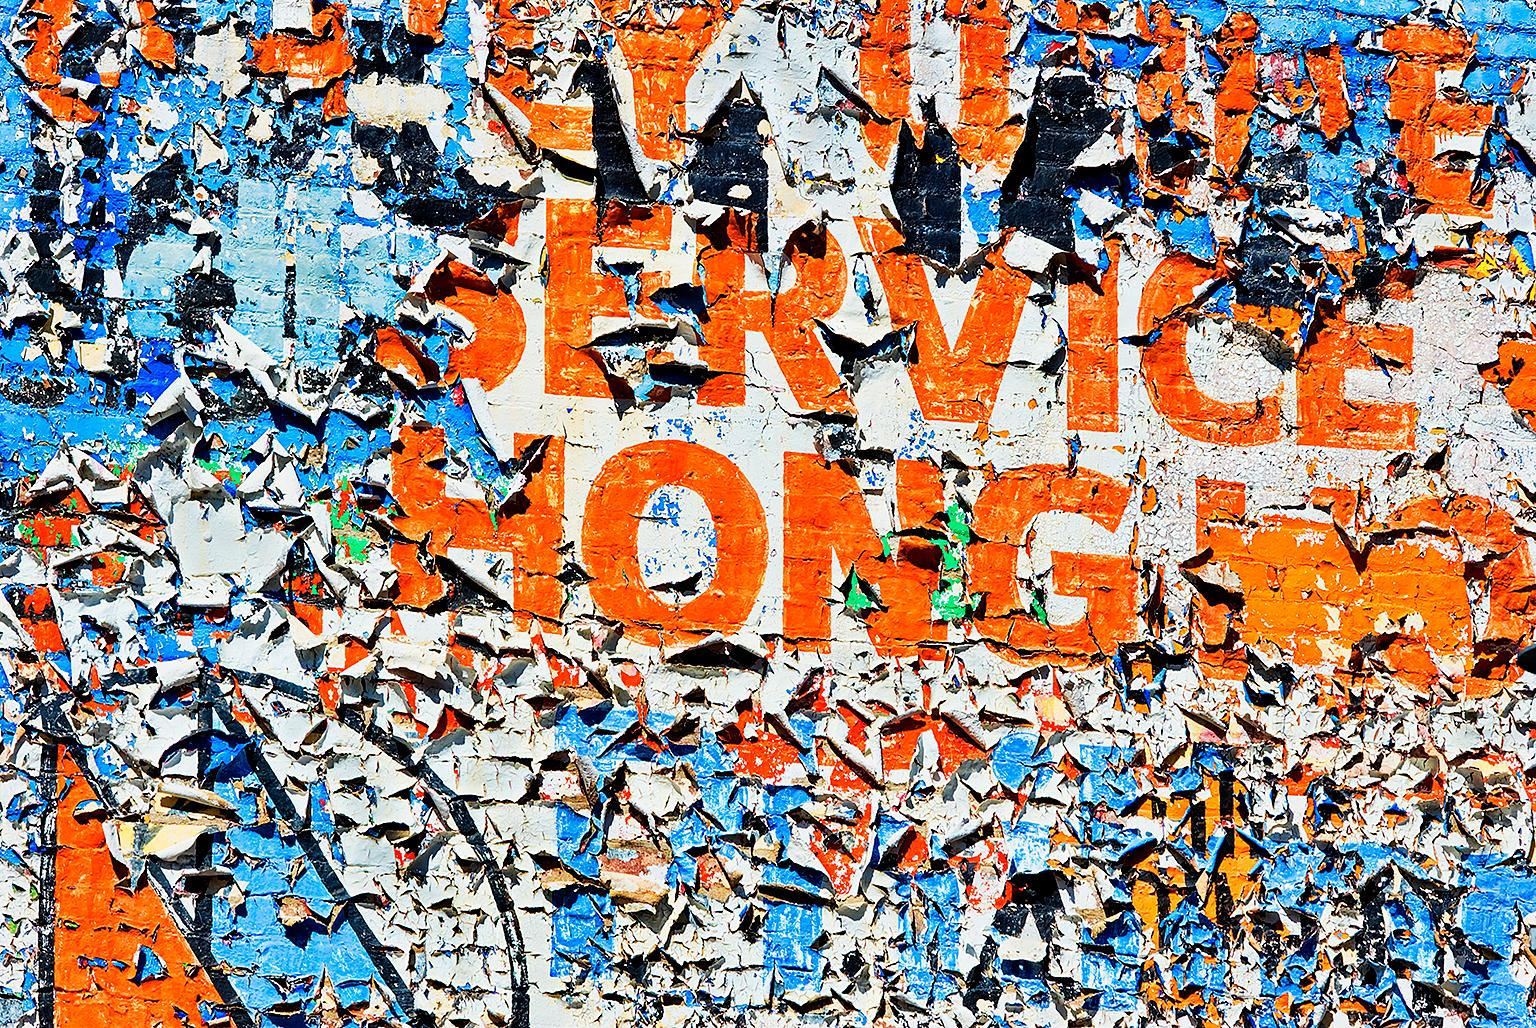 Mitchell Funk Color Photograph - Cracked Paint Abstraction Chinatown San Francisco Mural, Abstract Photography